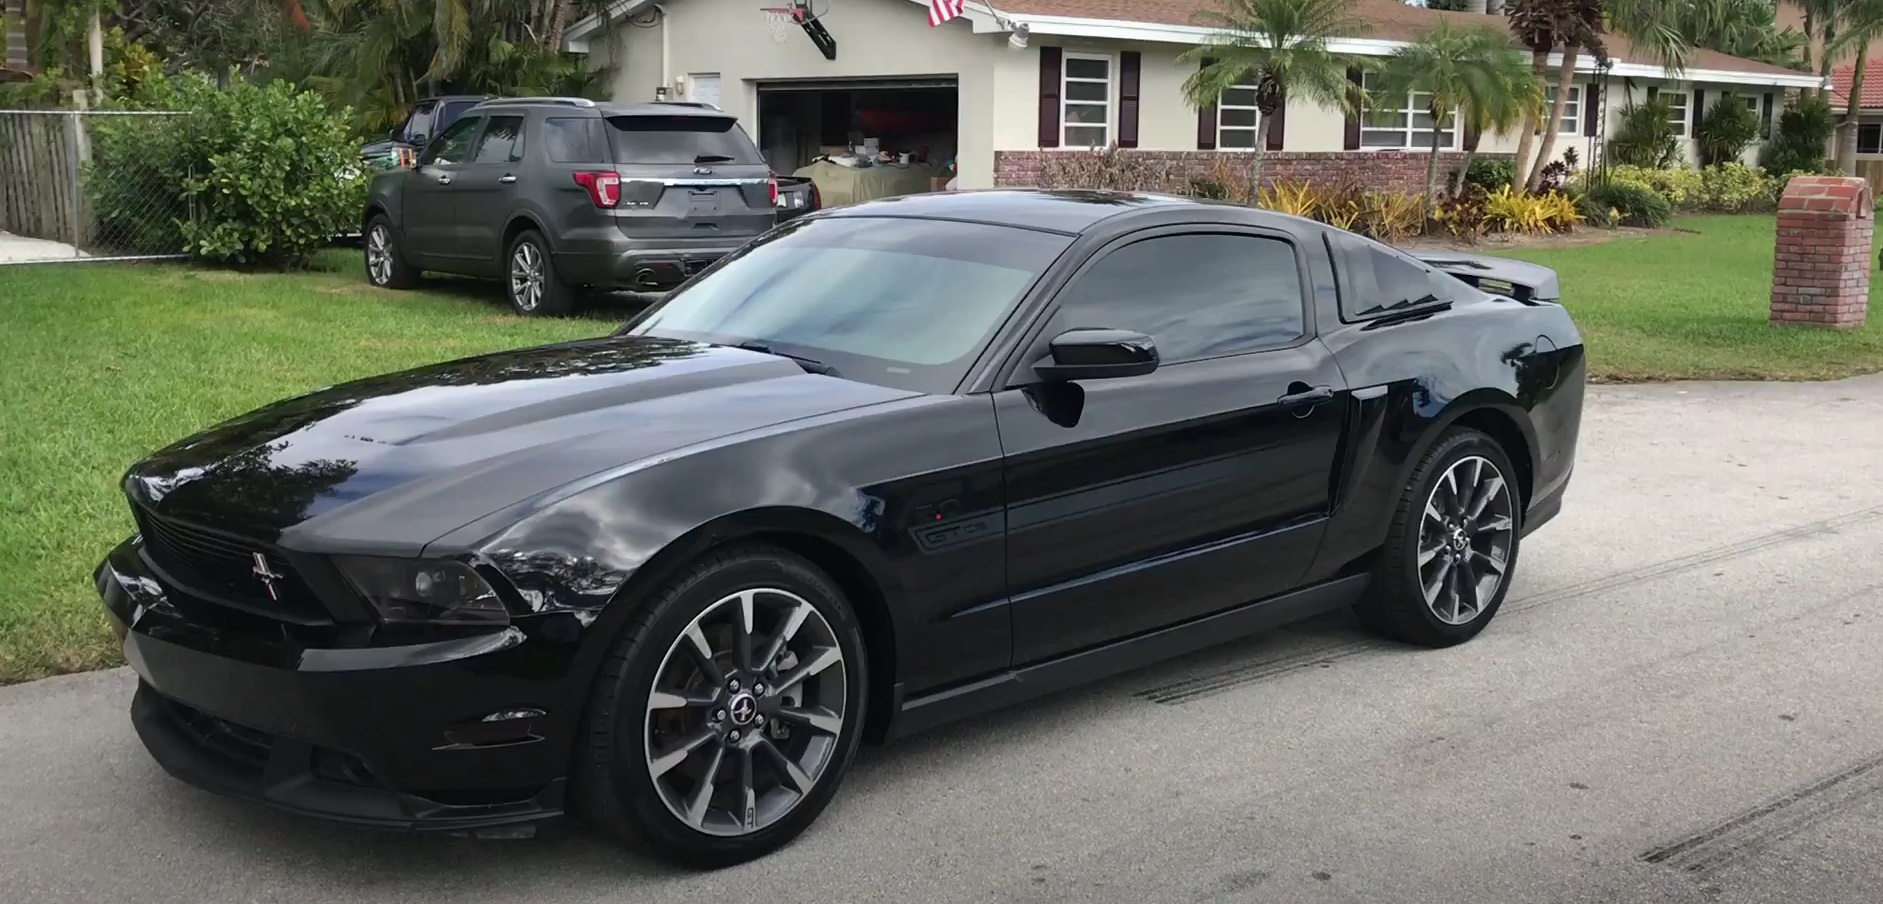 Video: 2012 Ford Mustang GT California Special Test Drive